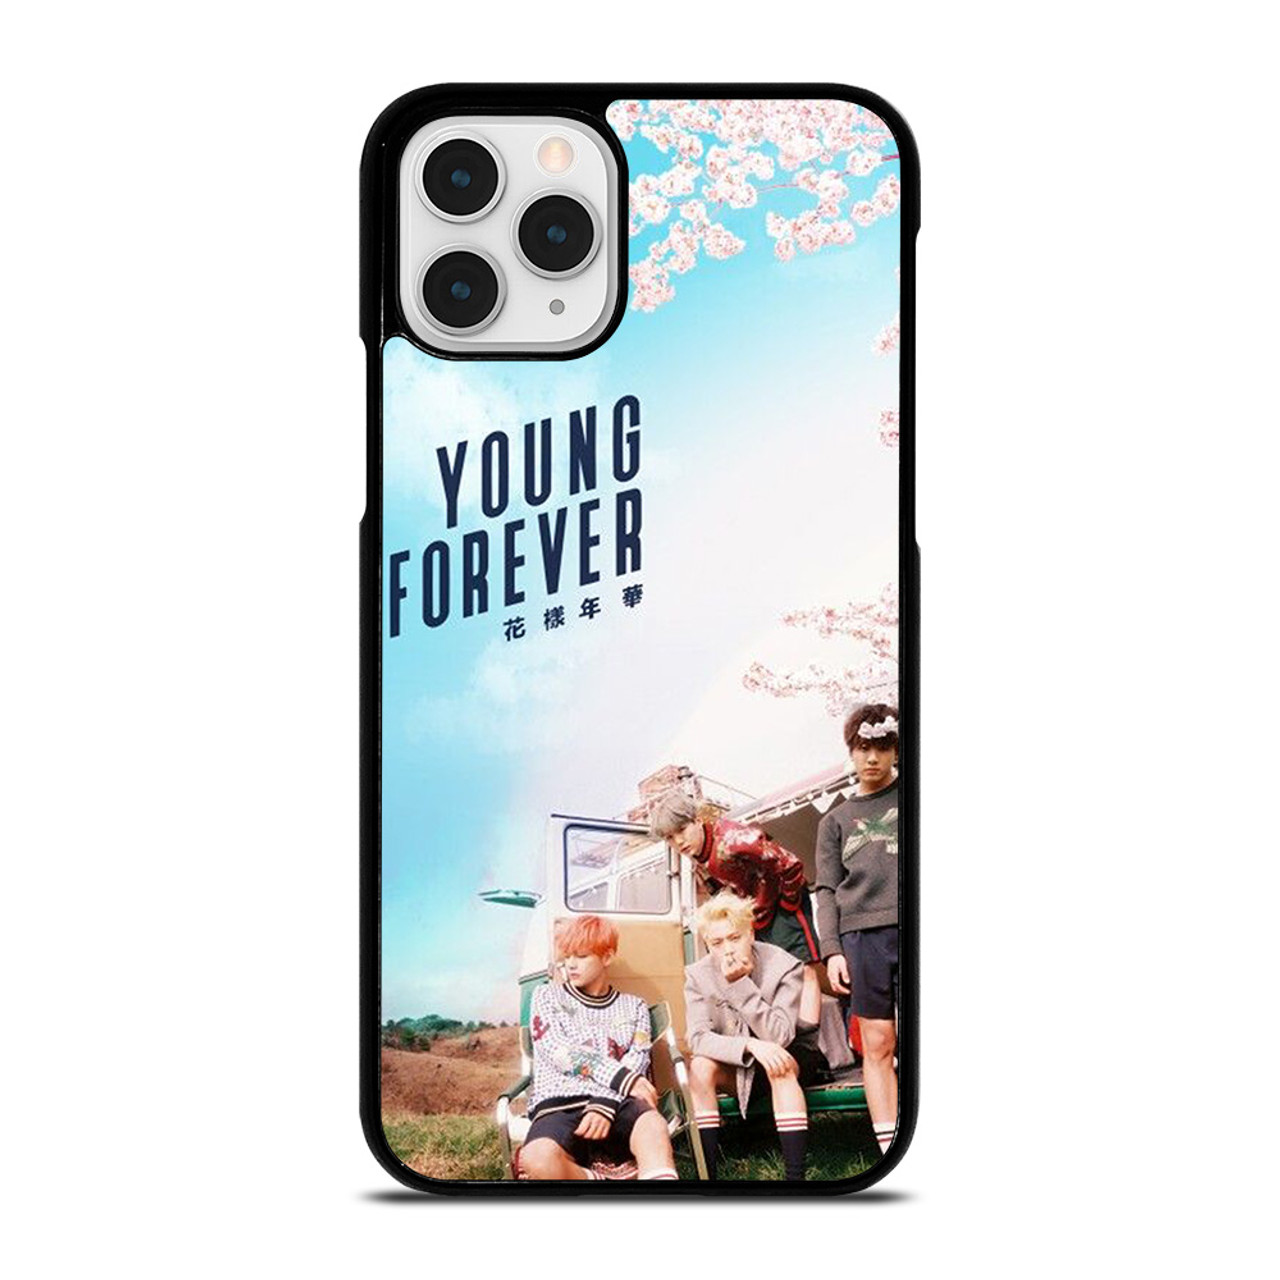 YOUNG FOREVER BANGTAN BOYS BTS iPhone XR Case Cover